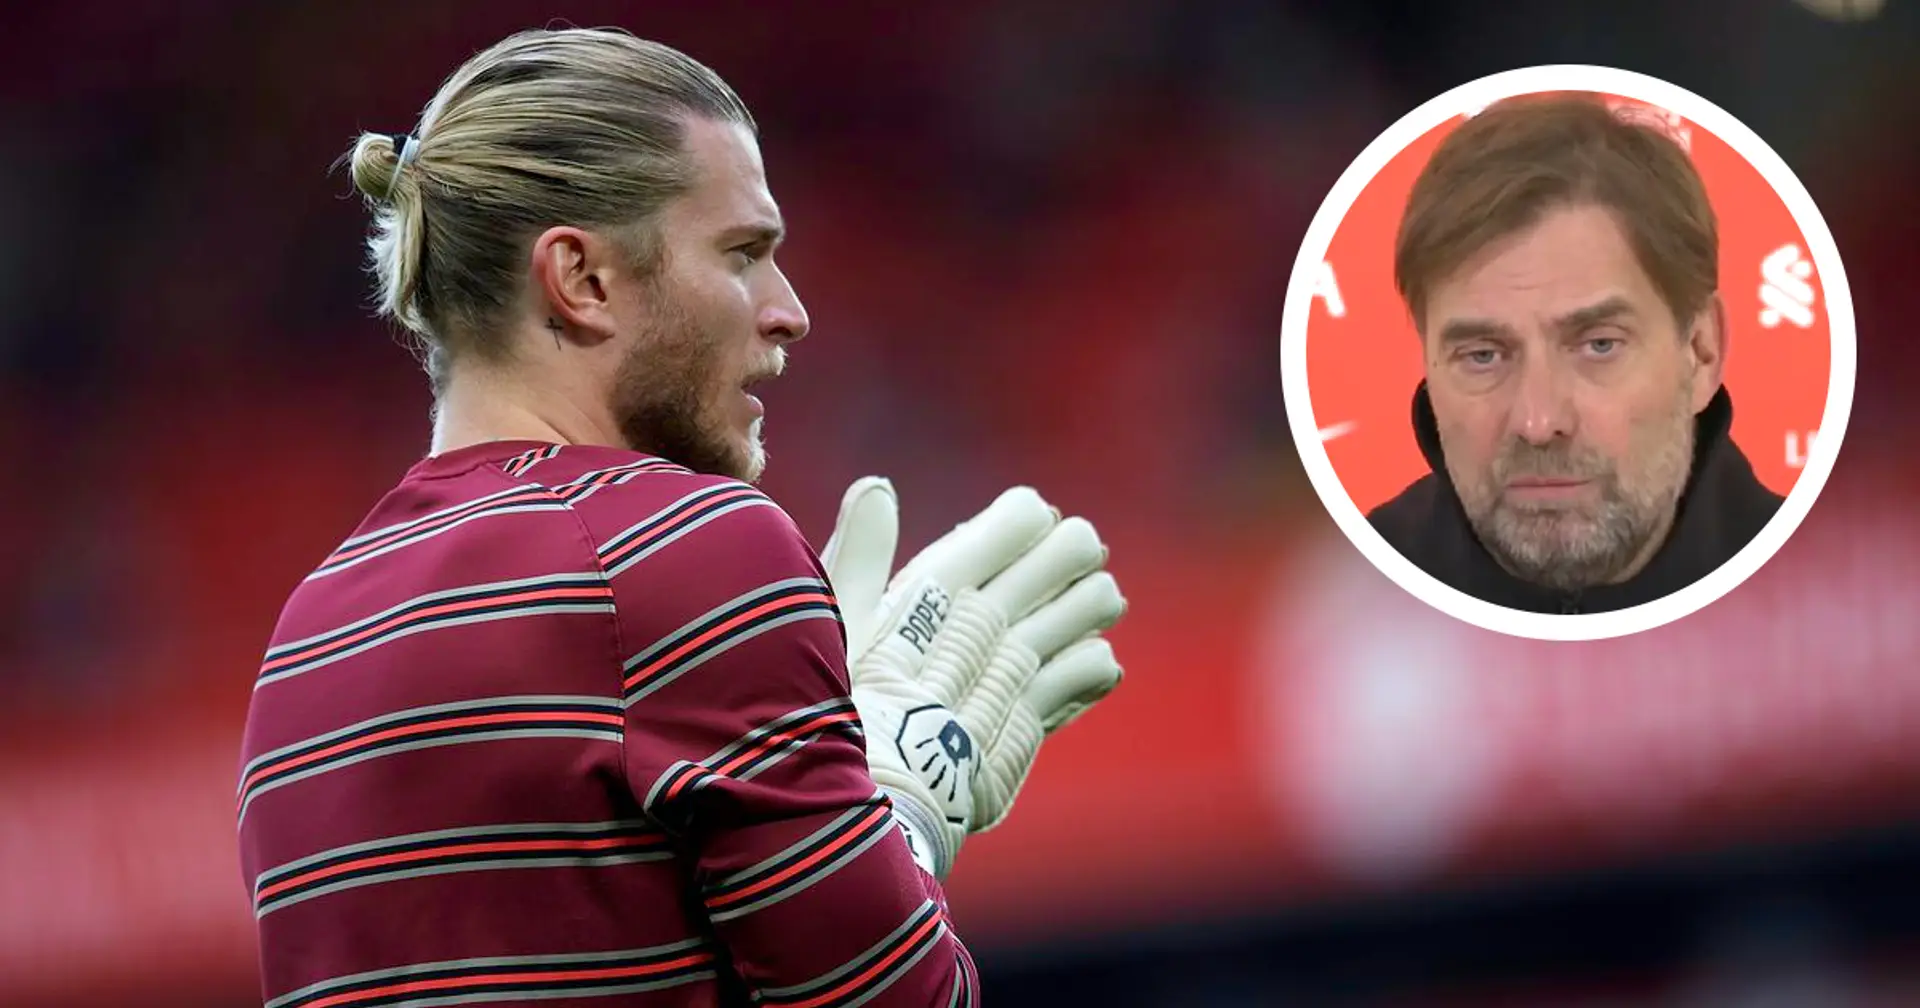 'He's 5th choice at Liverpool': Klopp explains Karius' situation in detail